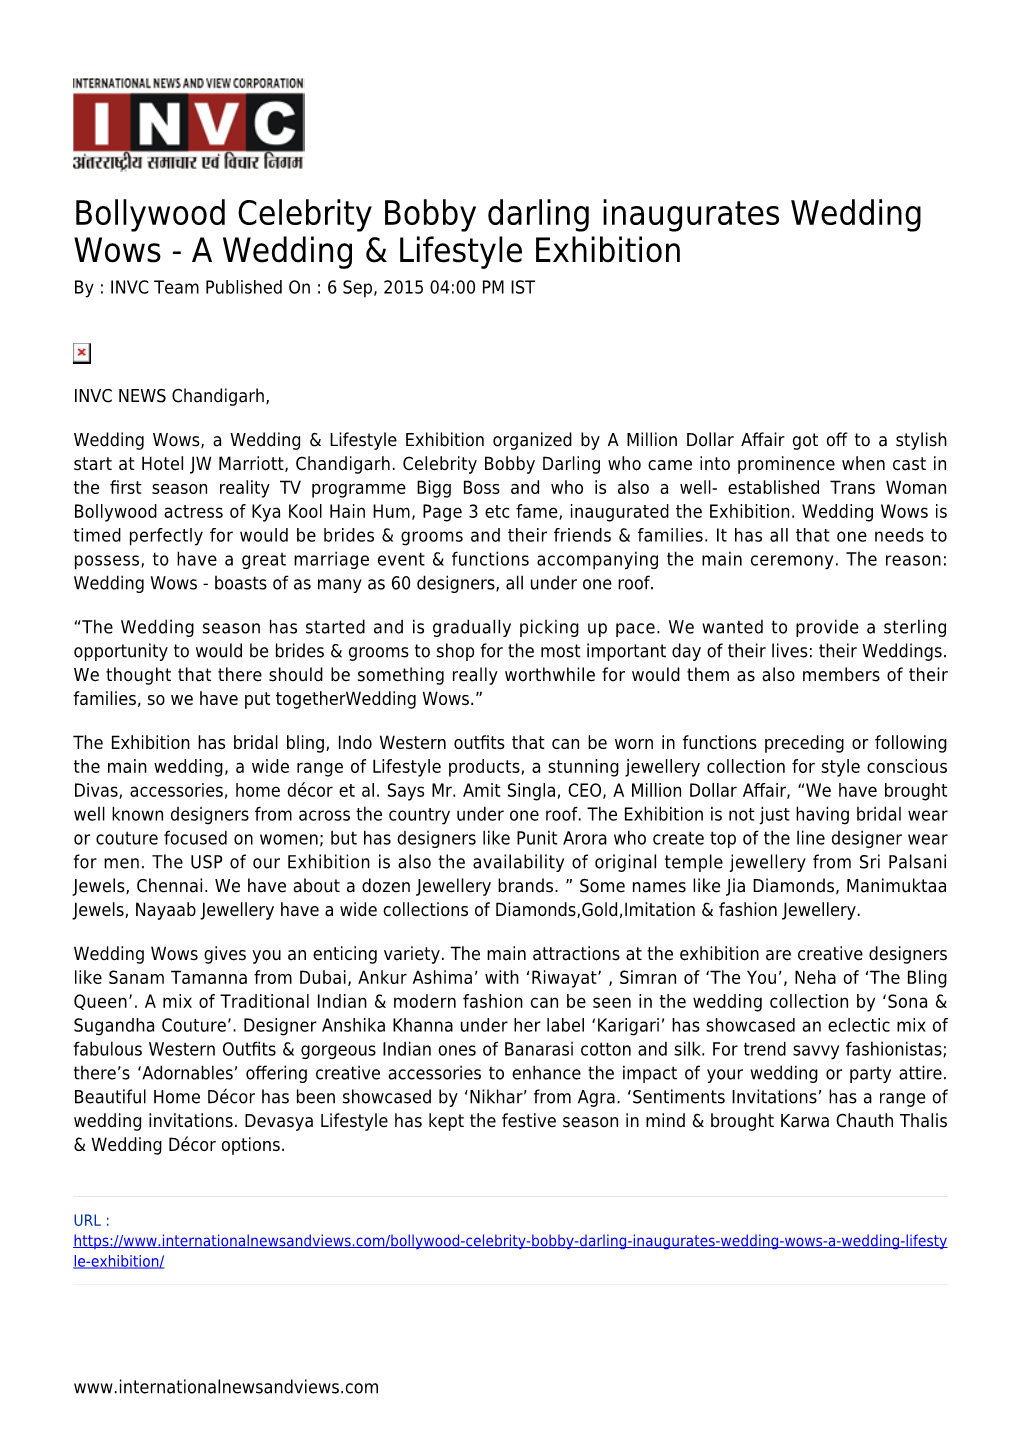 Bollywood Celebrity Bobby Darling Inaugurates Wedding Wows - a Wedding & Lifestyle Exhibition by : INVC Team Published on : 6 Sep, 2015 04:00 PM IST